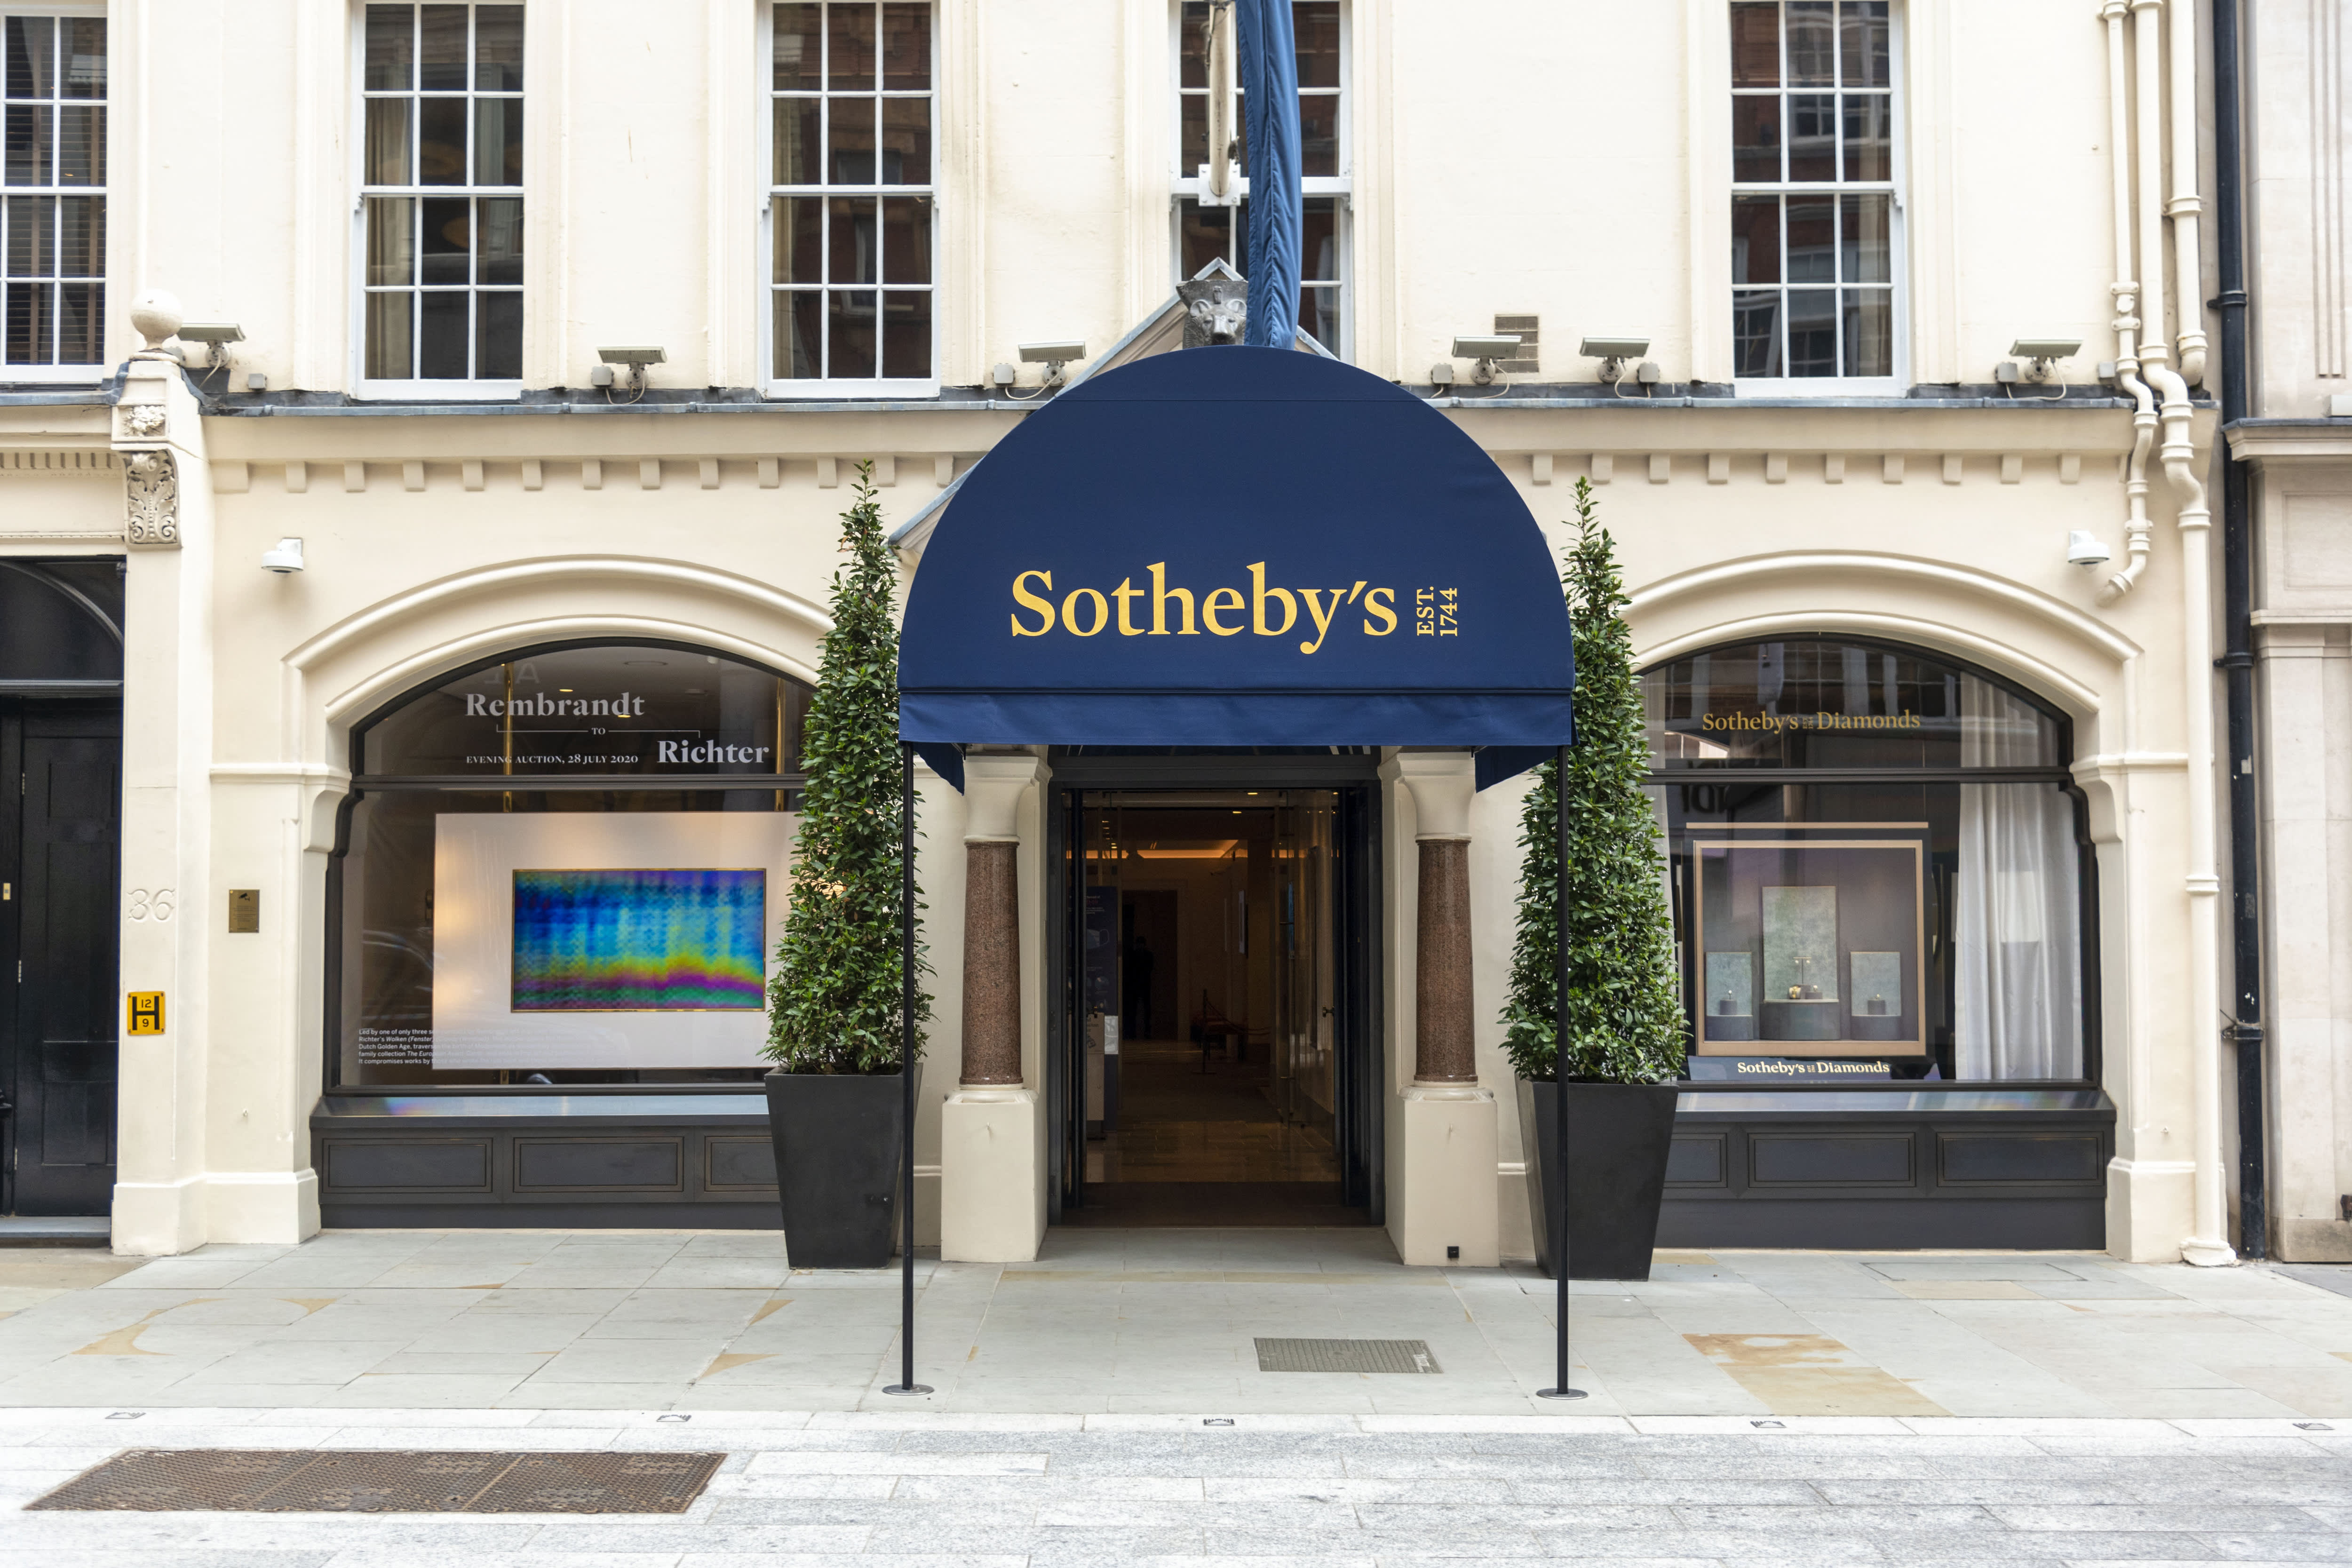 Sotheby’s enters the NFT world in collaboration with digital artist Pak